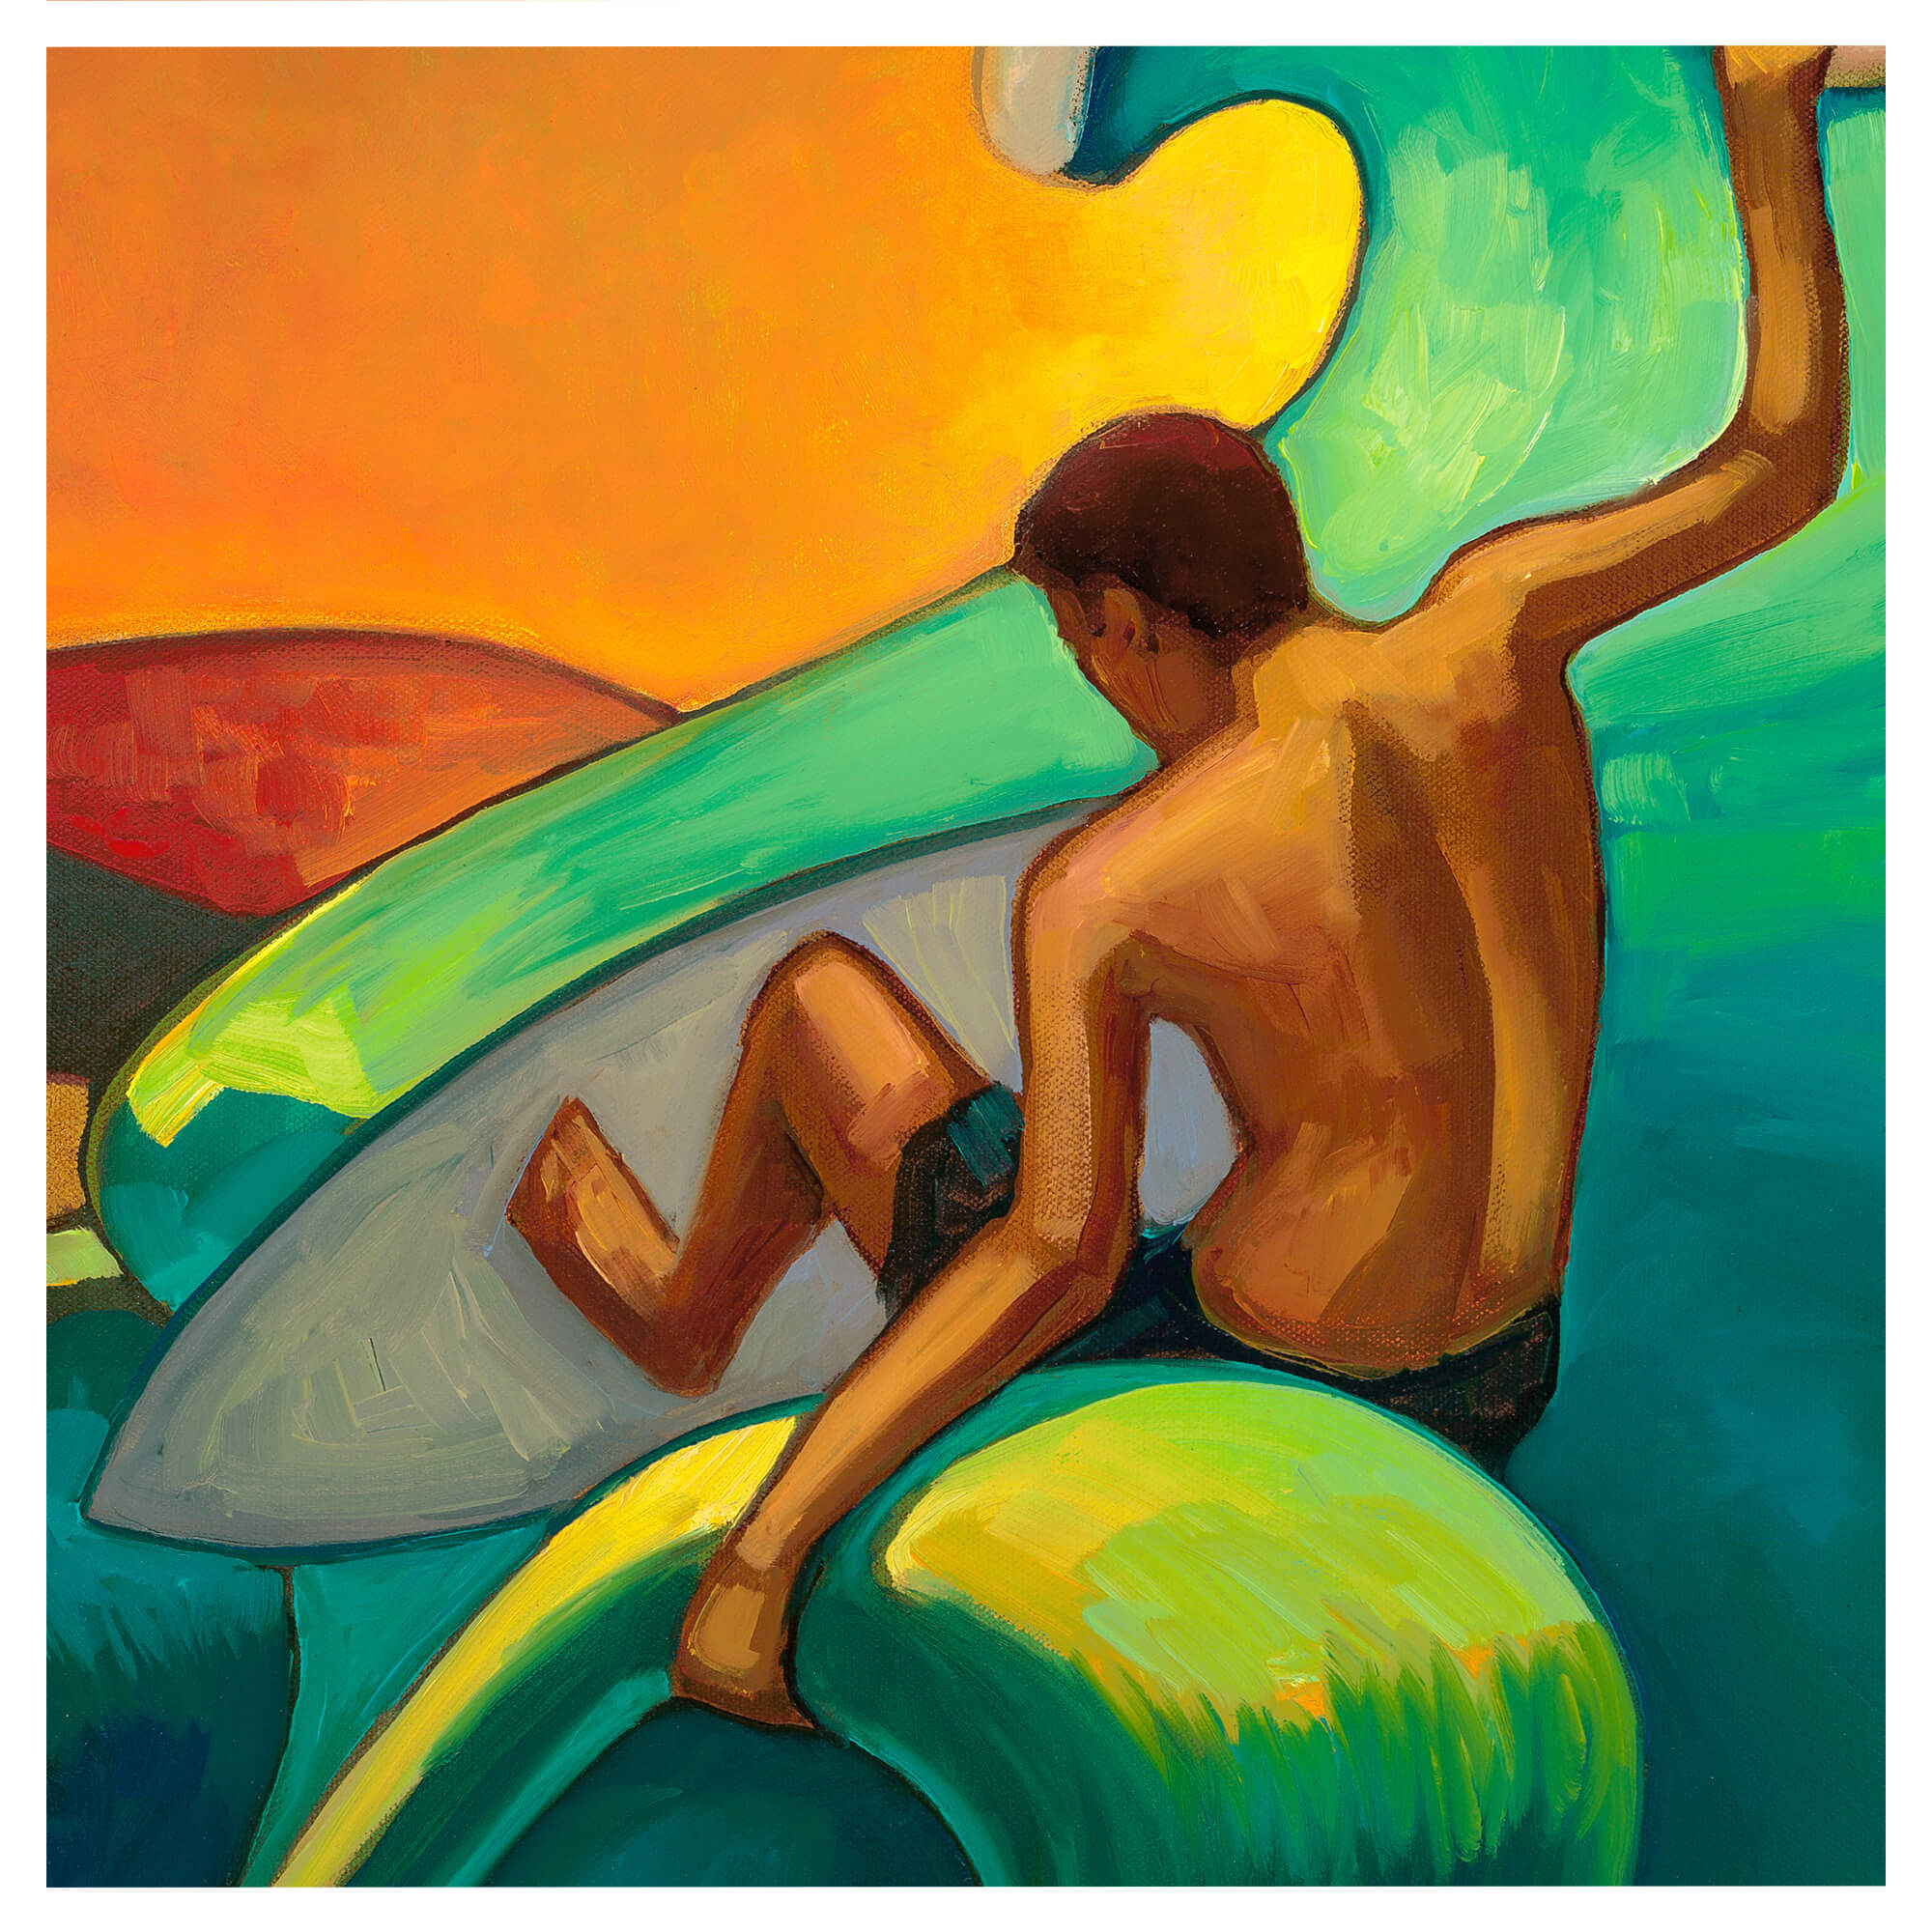 A man on a surfboard and a large wave by Hawaii artist Colin Redican